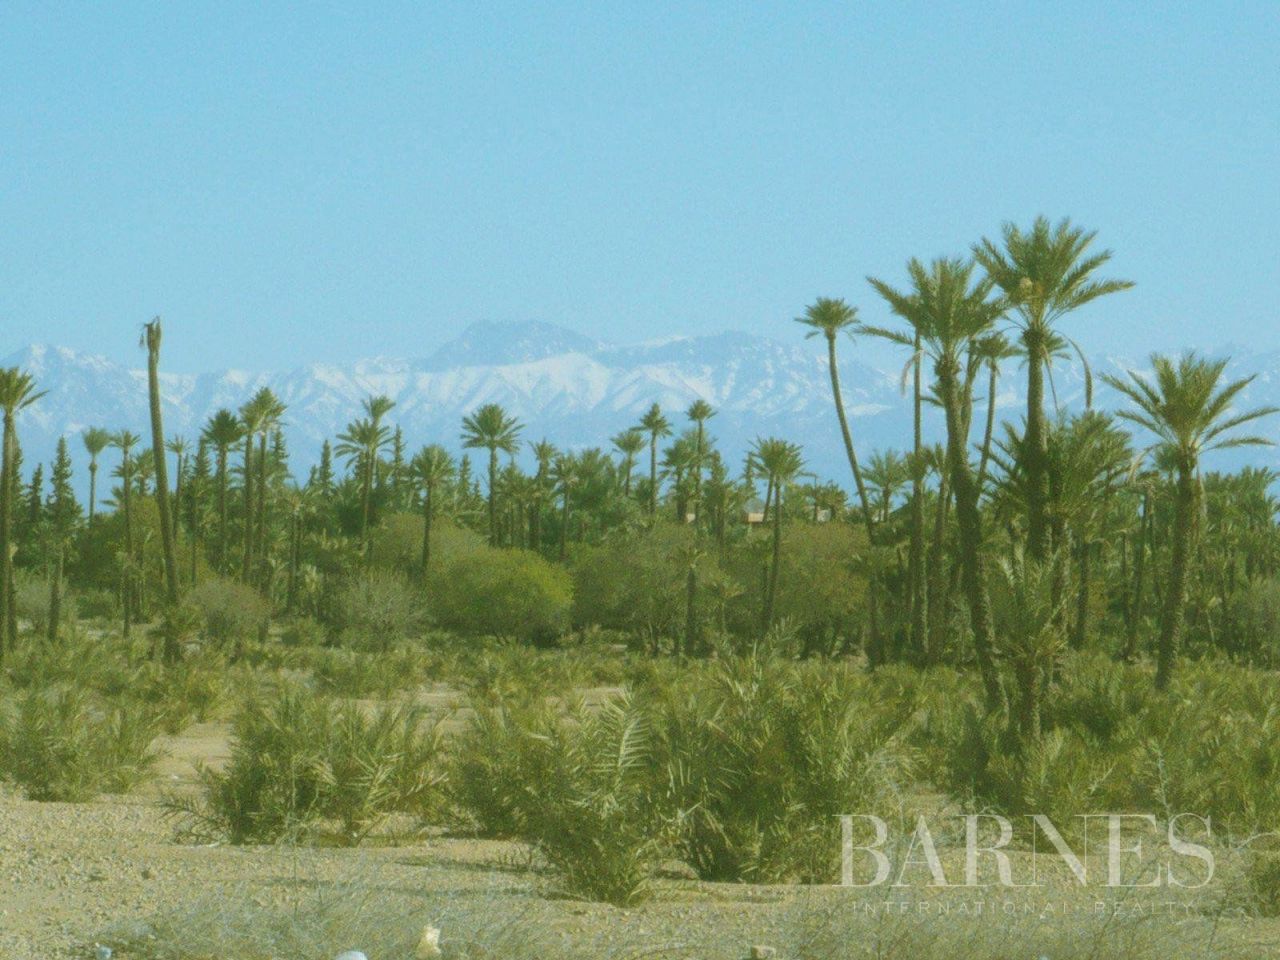 Land in Marrakesh, Morocco - picture 1